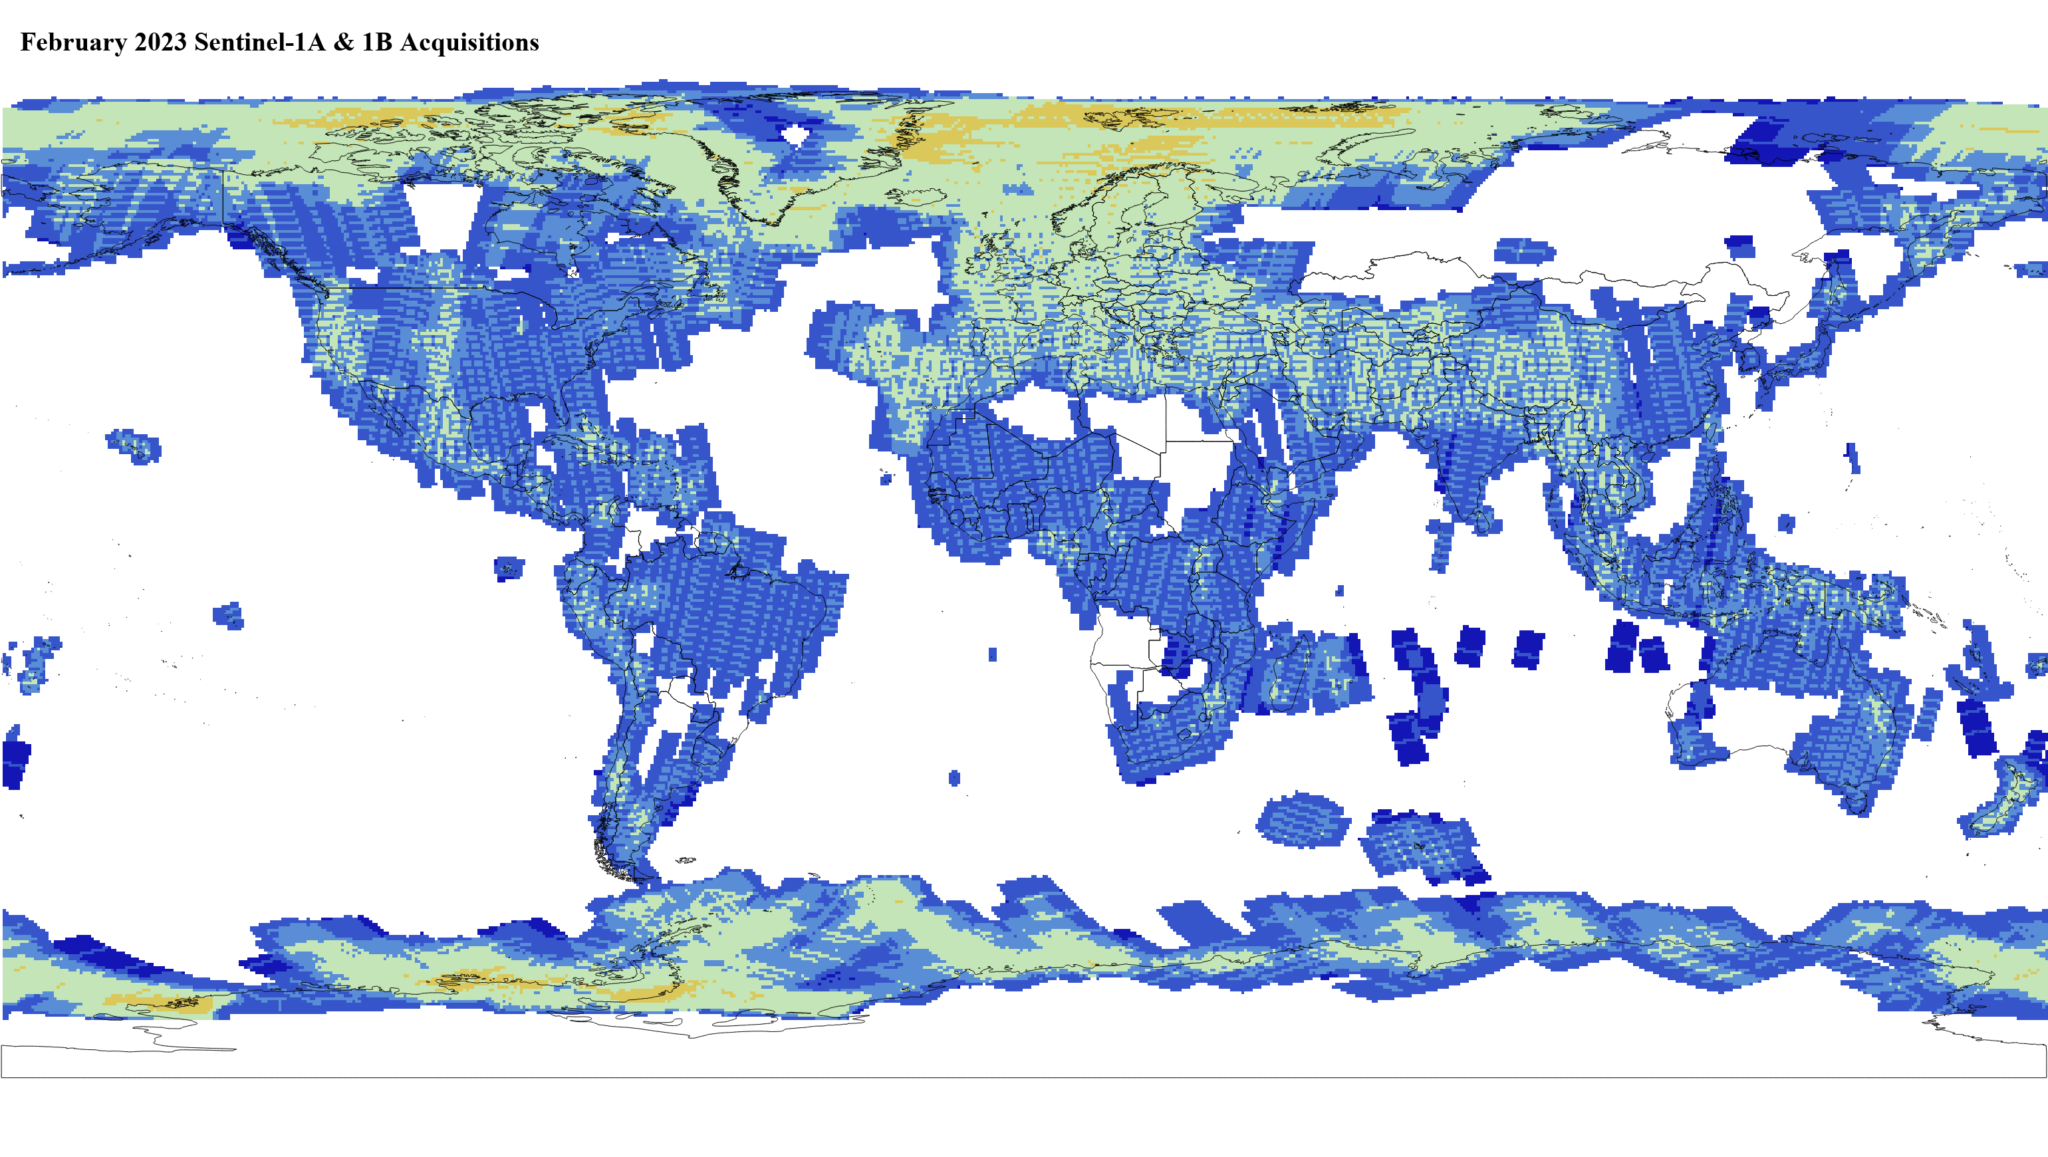 Heat map of Sentinel-1A and -1B GRD global acquisitions February 2023